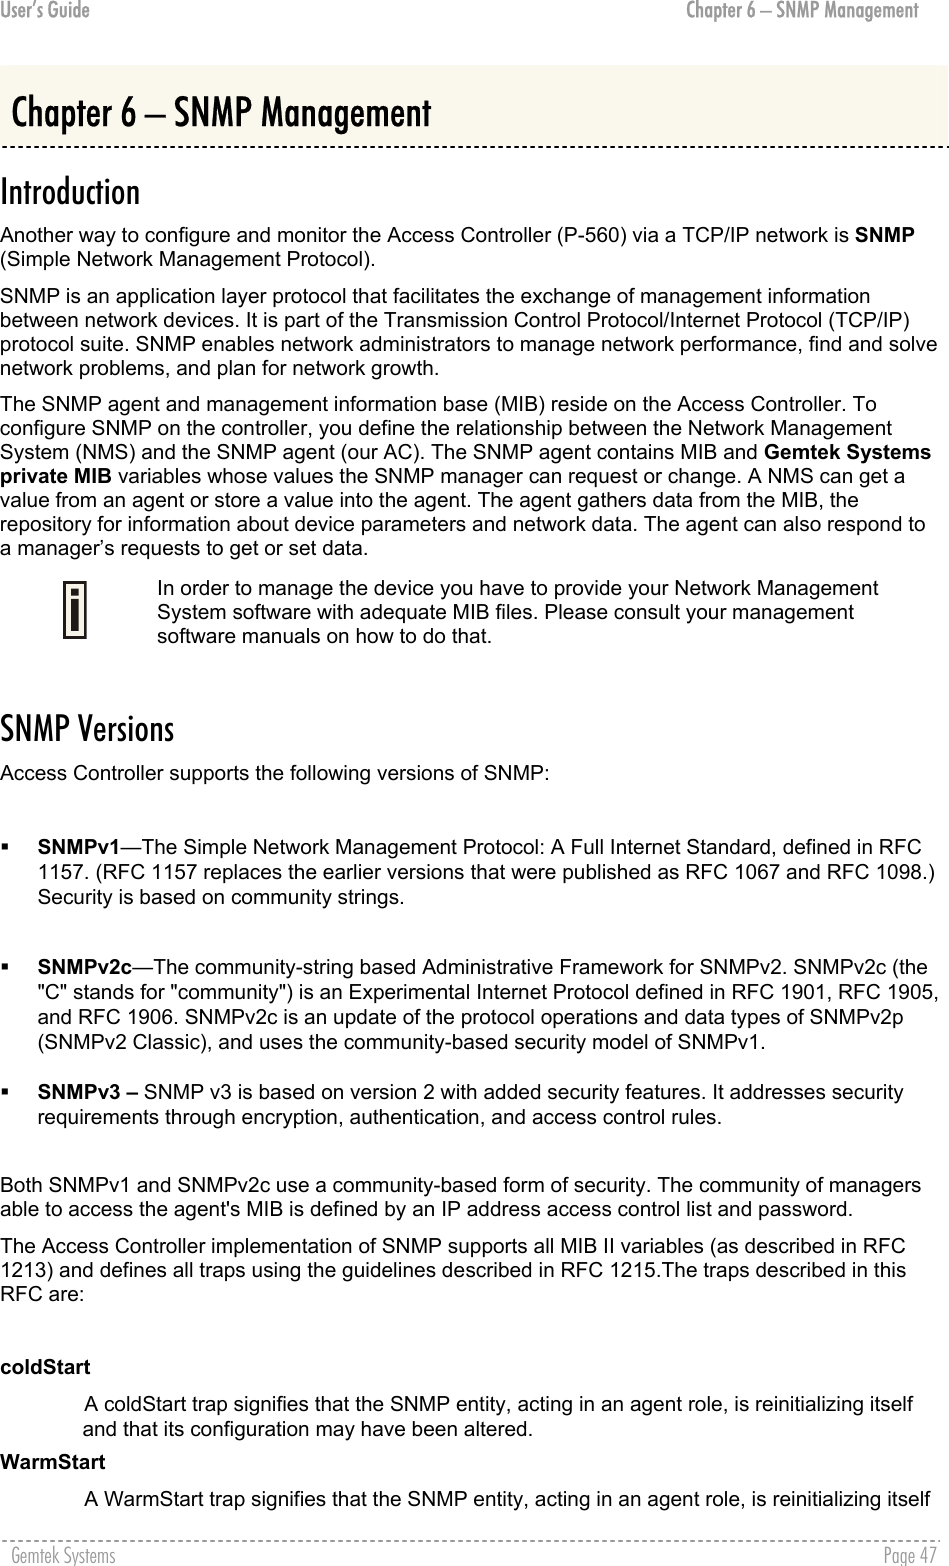 User’s Guide  Chapter 6 – SNMP Management Chapter 6 – SNMP Management Introduction Another way to configure and monitor the Access Controller (P-560) via a TCP/IP network is SNMP (Simple Network Management Protocol). SNMP is an application layer protocol that facilitates the exchange of management information between network devices. It is part of the Transmission Control Protocol/Internet Protocol (TCP/IP) protocol suite. SNMP enables network administrators to manage network performance, find and solve network problems, and plan for network growth. The SNMP agent and management information base (MIB) reside on the Access Controller. To configure SNMP on the controller, you define the relationship between the Network Management System (NMS) and the SNMP agent (our AC). The SNMP agent contains MIB and Gemtek Systems private MIB variables whose values the SNMP manager can request or change. A NMS can get a value from an agent or store a value into the agent. The agent gathers data from the MIB, the repository for information about device parameters and network data. The agent can also respond to a manager’s requests to get or set data.  In order to manage the device you have to provide your Network Management System software with adequate MIB files. Please consult your management software manuals on how to do that.  SNMP Versions Access Controller supports the following versions of SNMP:    SNMPv1—The Simple Network Management Protocol: A Full Internet Standard, defined in RFC 1157. (RFC 1157 replaces the earlier versions that were published as RFC 1067 and RFC 1098.) Security is based on community strings.     SNMPv2c—The community-string based Administrative Framework for SNMPv2. SNMPv2c (the &quot;C&quot; stands for &quot;community&quot;) is an Experimental Internet Protocol defined in RFC 1901, RFC 1905, and RFC 1906. SNMPv2c is an update of the protocol operations and data types of SNMPv2p (SNMPv2 Classic), and uses the community-based security model of SNMPv1.    SNMPv3 – SNMP v3 is based on version 2 with added security features. It addresses security requirements through encryption, authentication, and access control rules.  Both SNMPv1 and SNMPv2c use a community-based form of security. The community of managers able to access the agent&apos;s MIB is defined by an IP address access control list and password. The Access Controller implementation of SNMP supports all MIB II variables (as described in RFC 1213) and defines all traps using the guidelines described in RFC 1215.The traps described in this RFC are:  coldStart A coldStart trap signifies that the SNMP entity, acting in an agent role, is reinitializing itself and that its configuration may have been altered. WarmStart A WarmStart trap signifies that the SNMP entity, acting in an agent role, is reinitializing itself Gemtek Systems    Page 47  